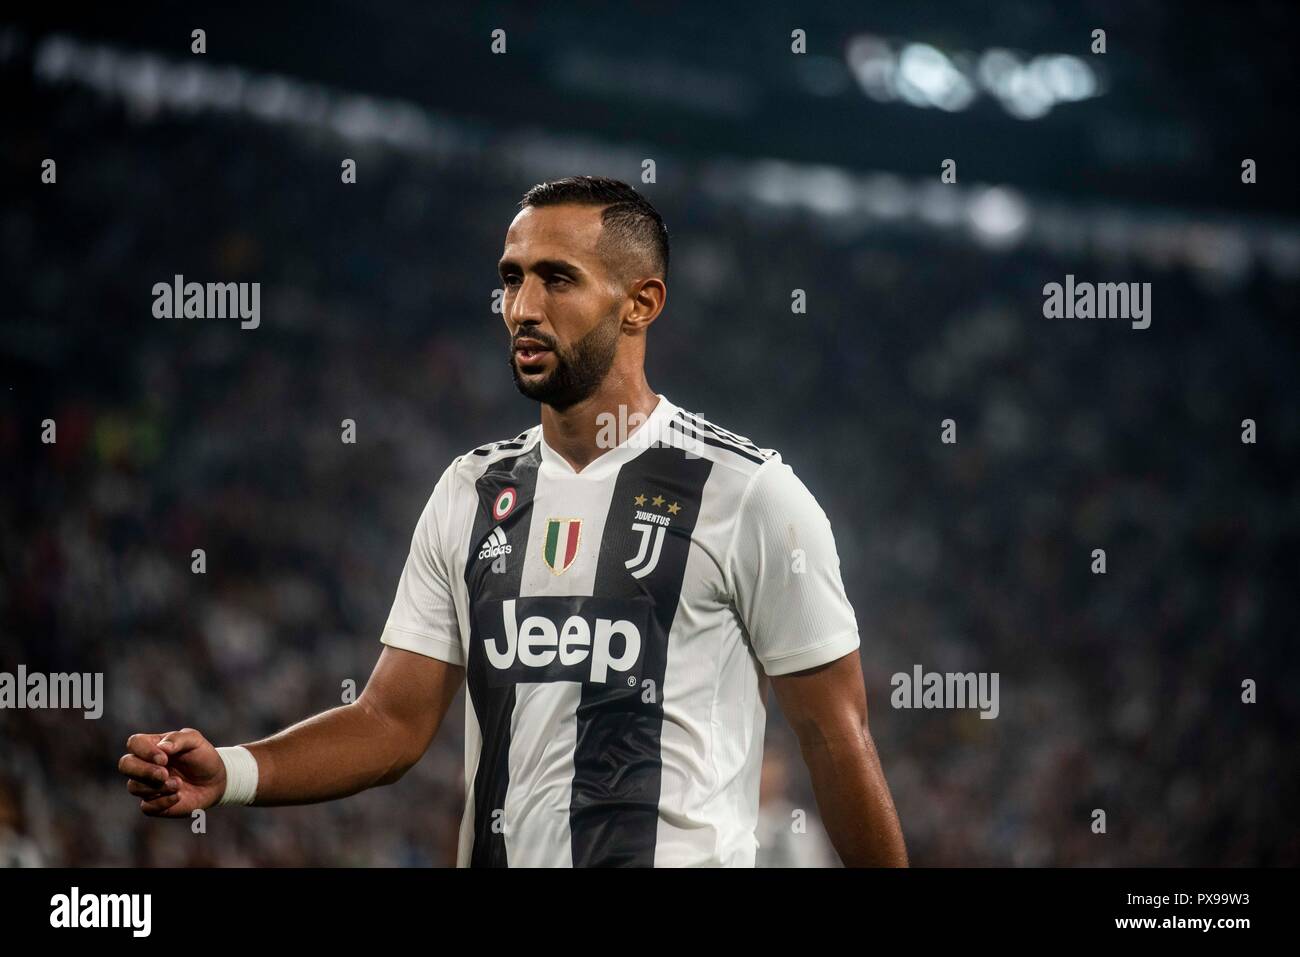 Medhi Benatia of Juventus during the Serie A match between Juventus and Genoa at the Juventus Stadium, Turin, Italy on 20 October 2018. Photo by Alberto Gandolfo. Editorial use only, license required for commercial use. No use in betting, games or a single club/league/player publications. Stock Photo